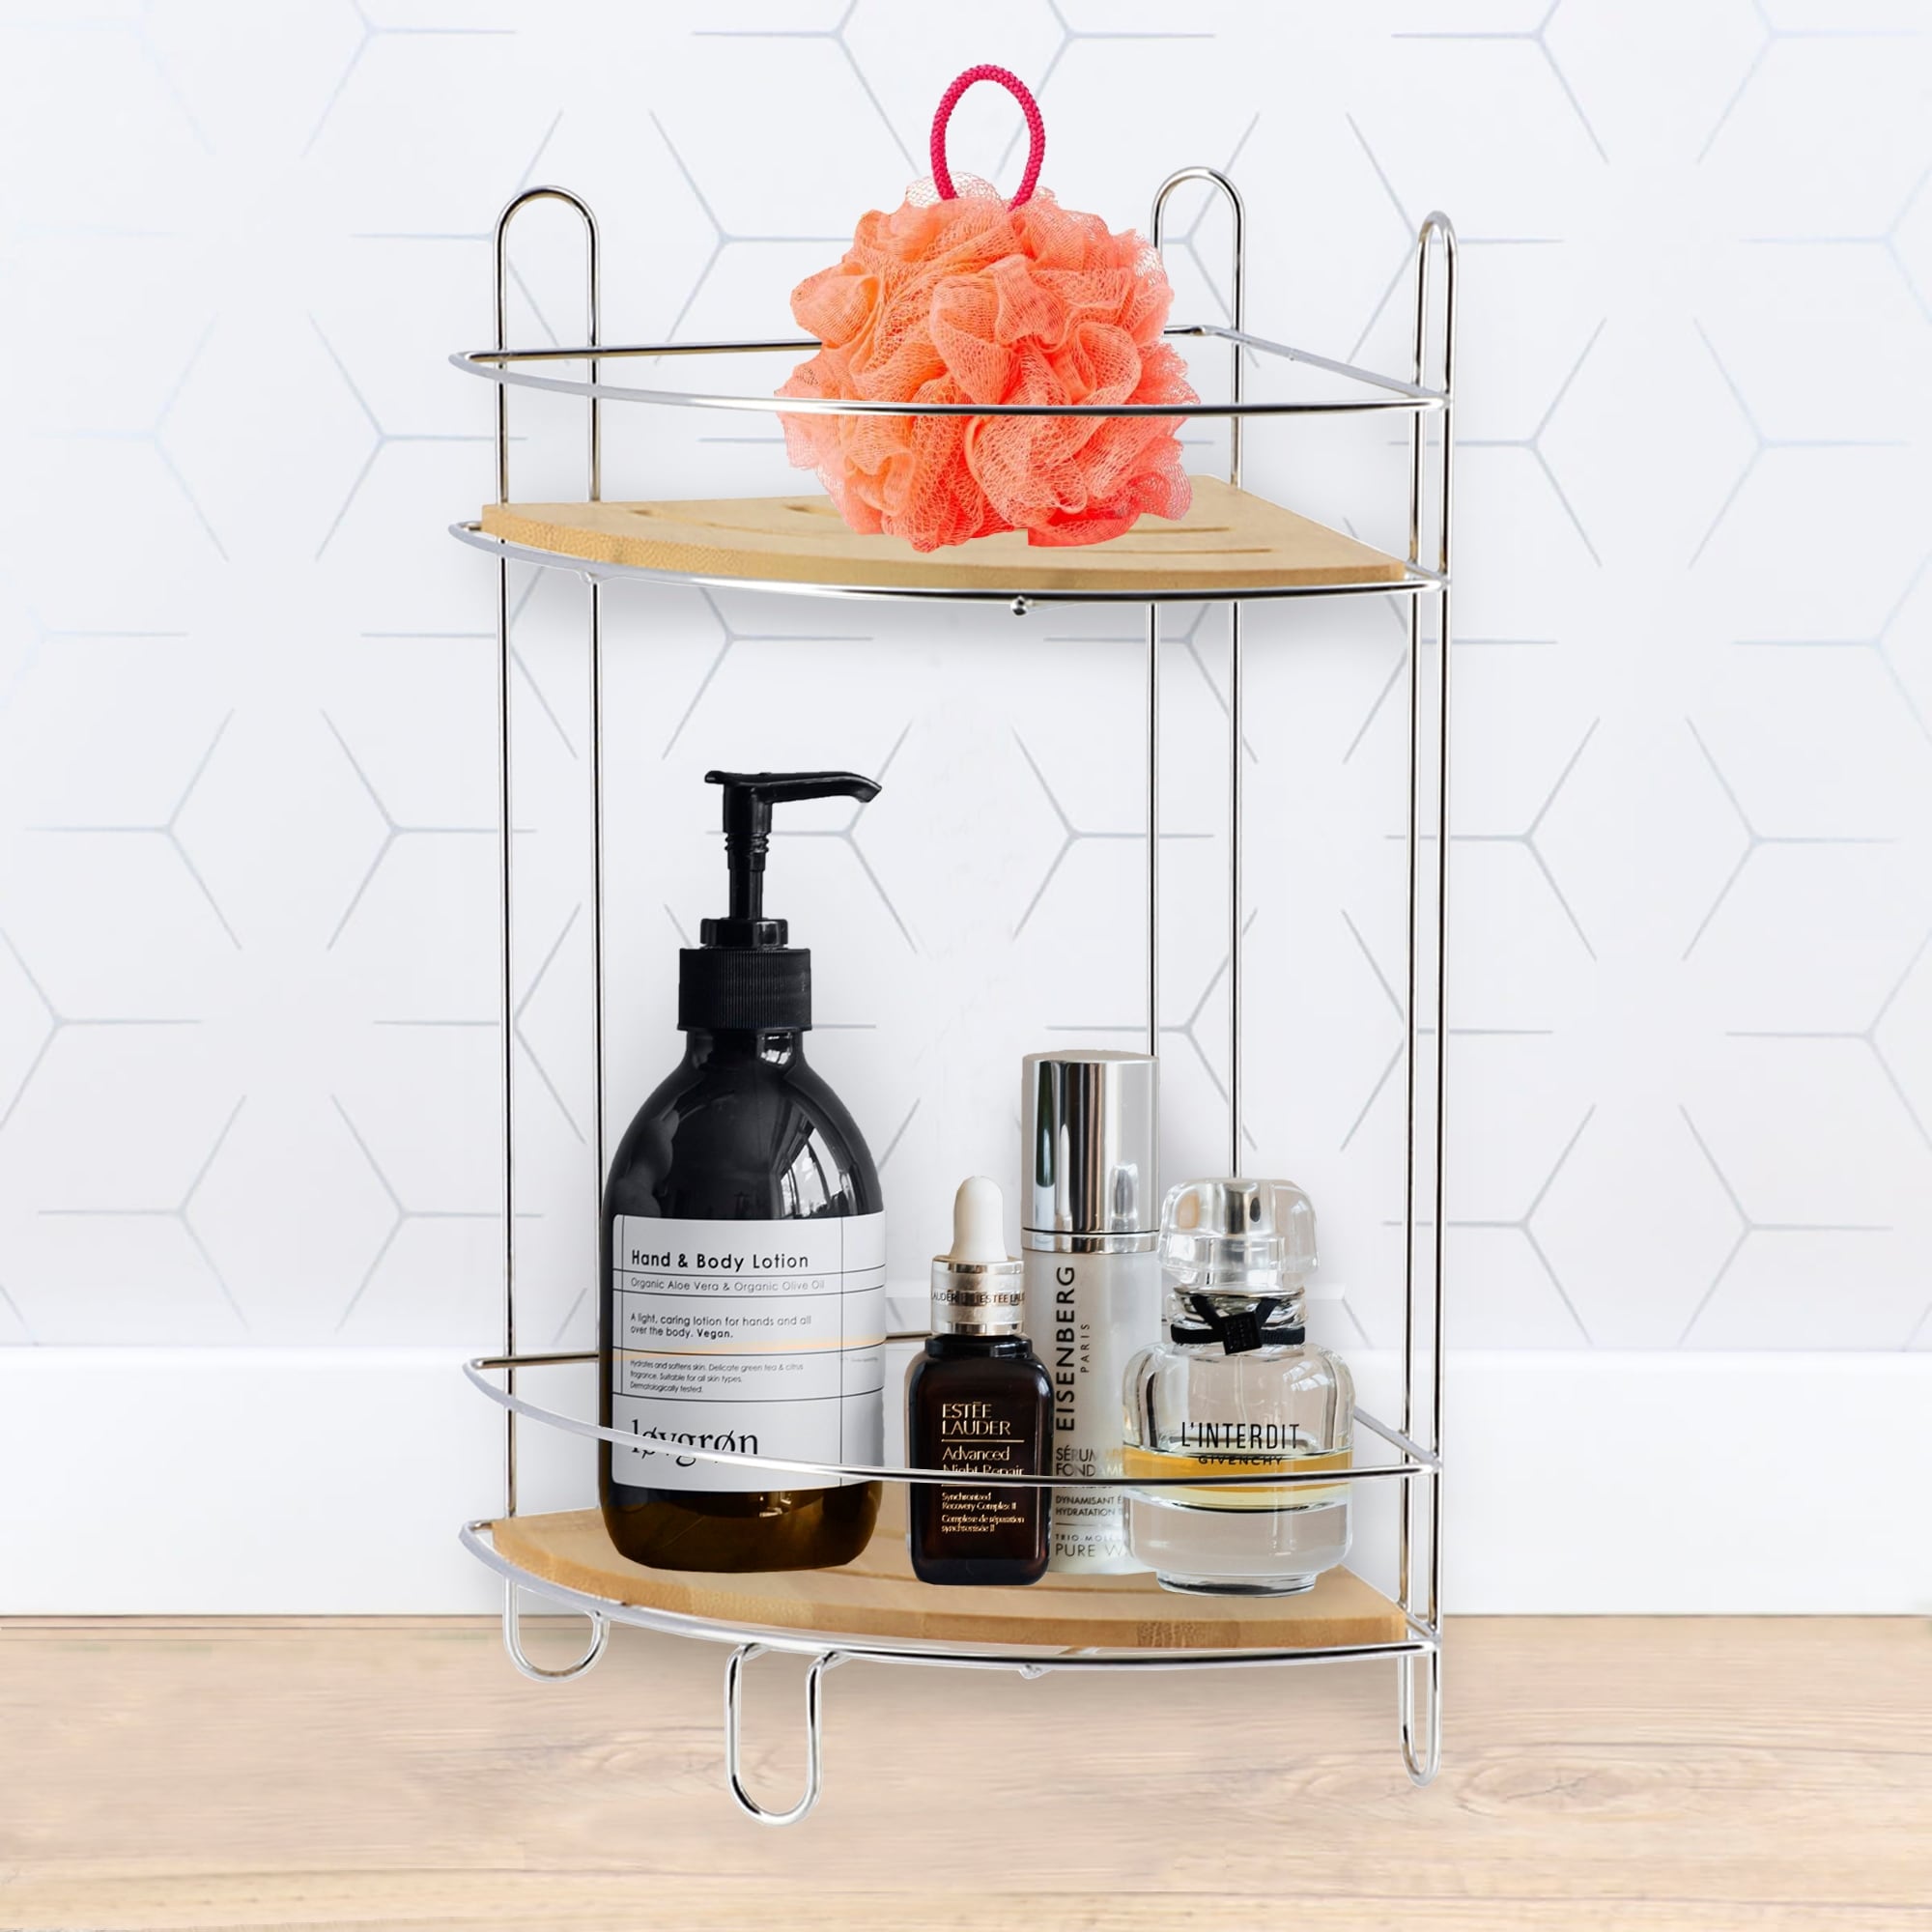 https://ak1.ostkcdn.com/images/products/is/images/direct/908bd138d9e6095c8720ac9dee42b492acc1df62/Organizer-Metal-Wire-Corner-Shower-Caddy-Bamboo.jpg